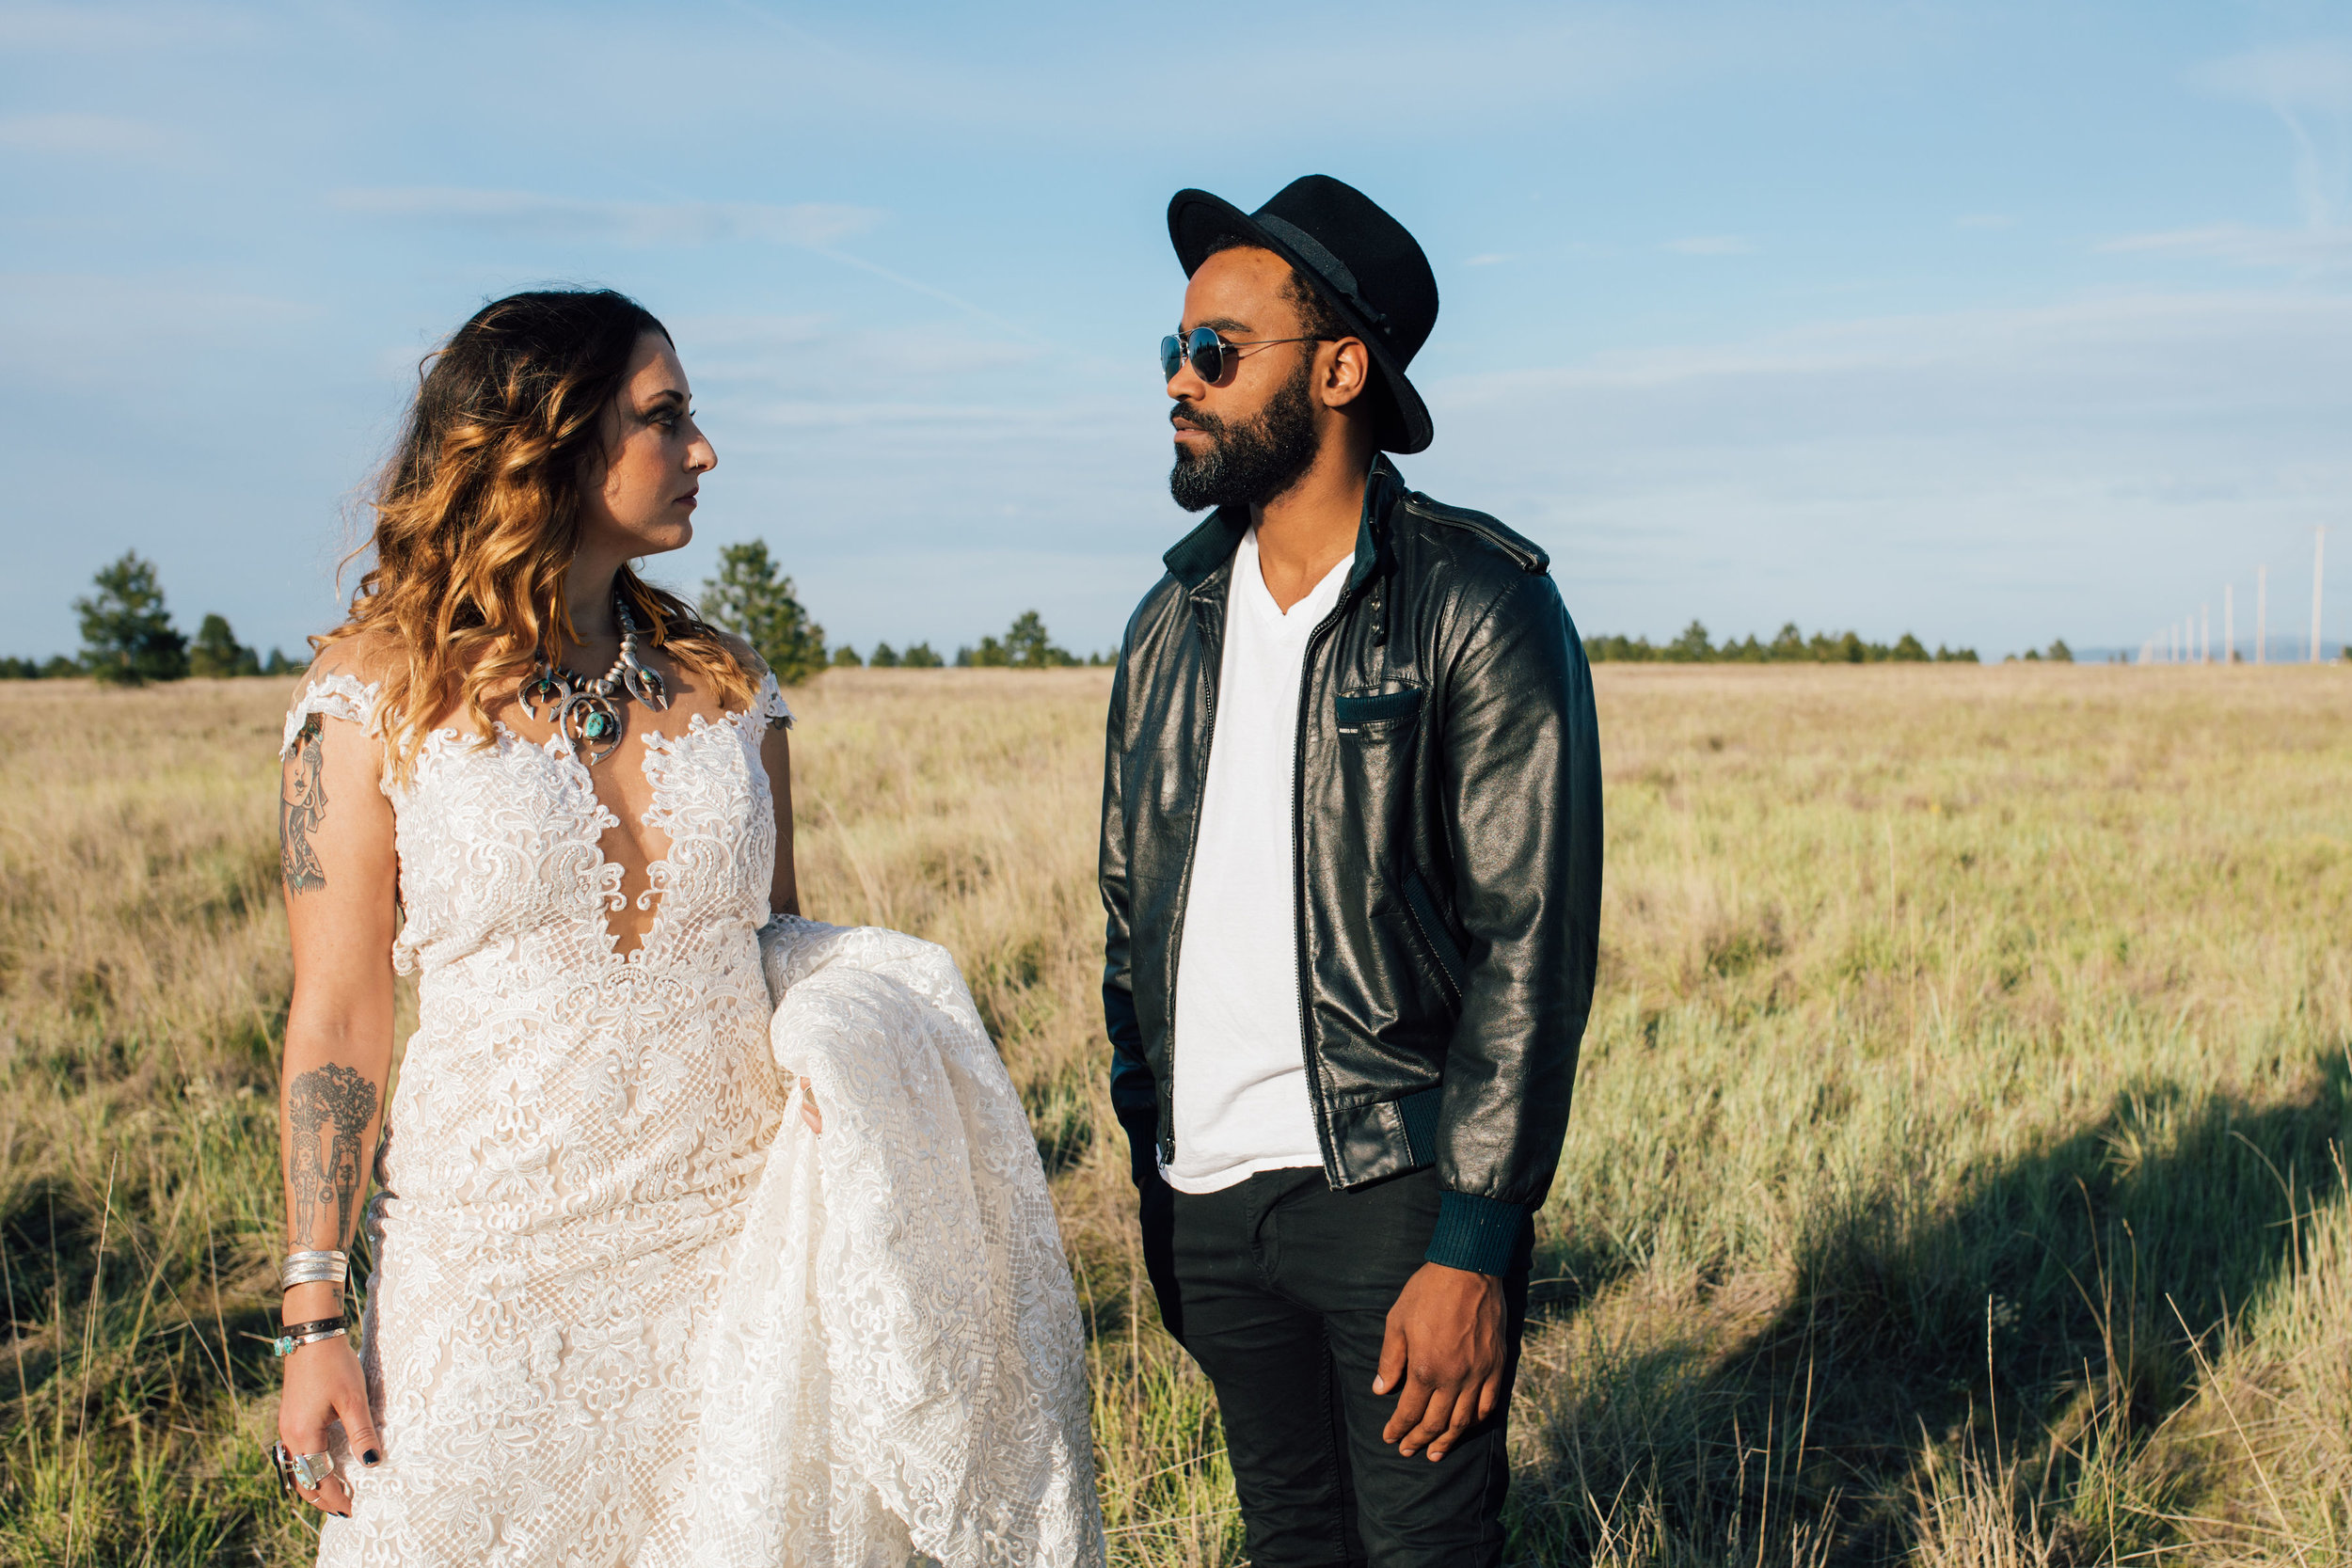 cool elopement spokane wedding groom stopping bride bride and groom looking at each other